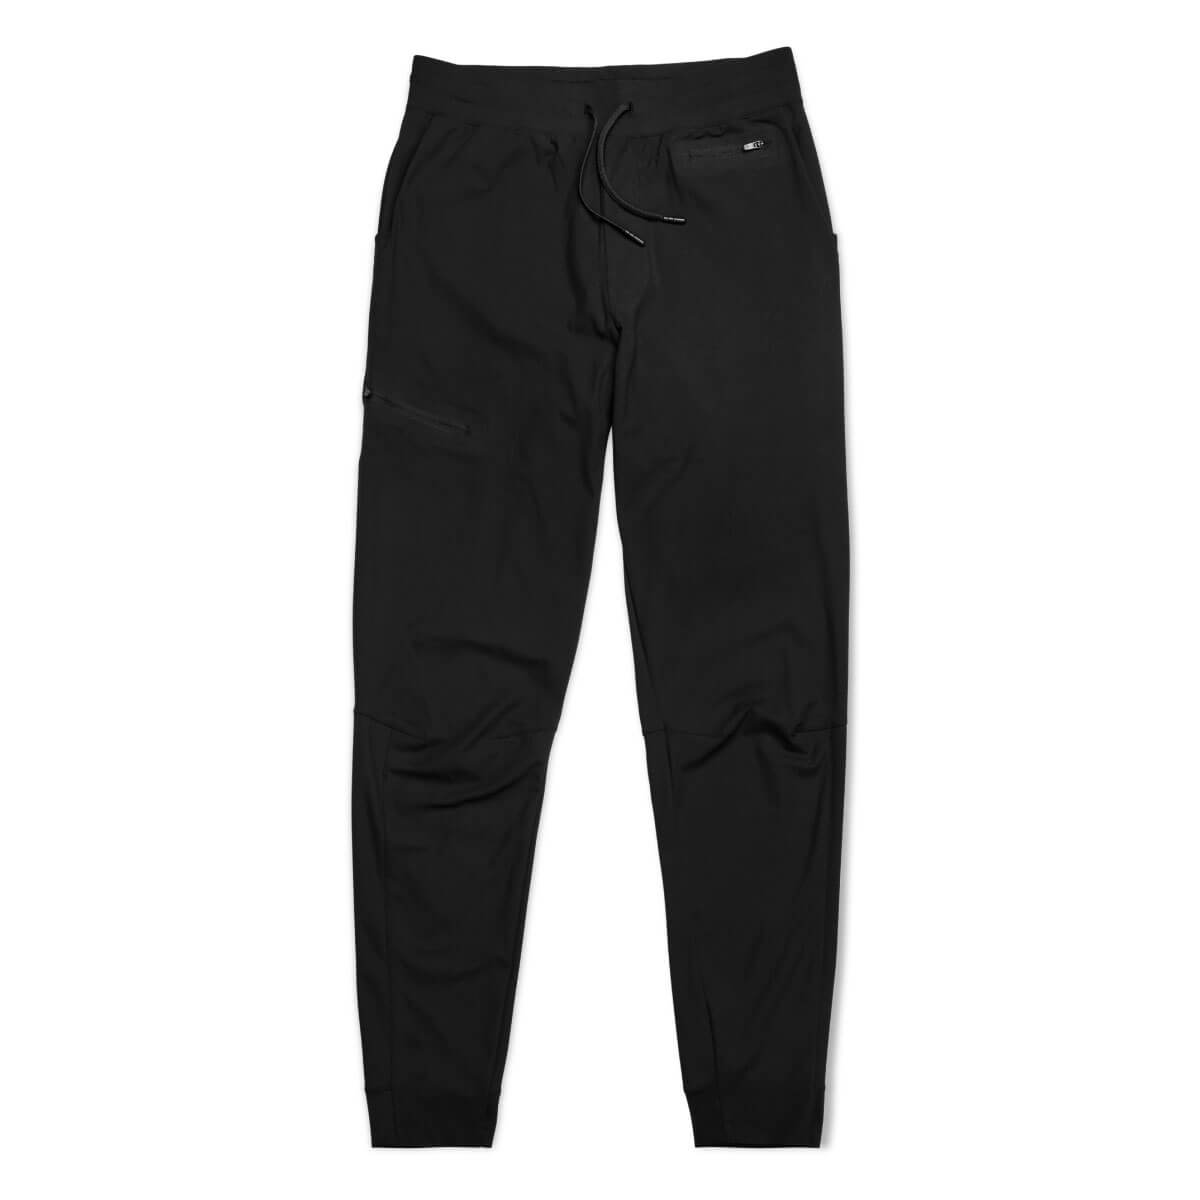 black-joggers-outset-collection.jpg__PID:eae56c8f-0c93-48dc-9be7-63f8ed84f568